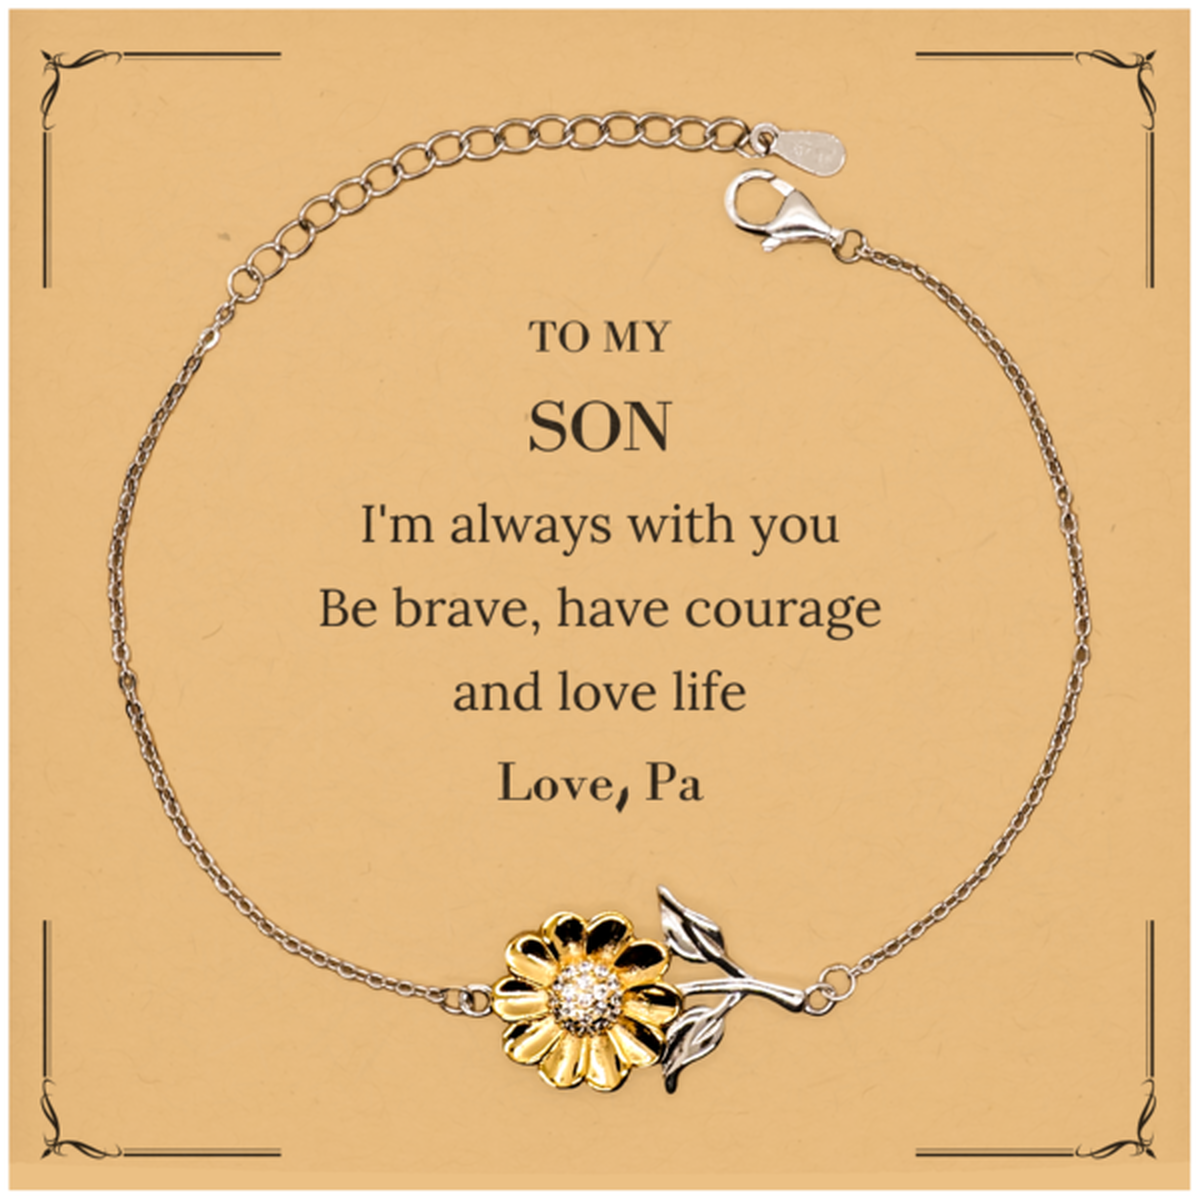 To My Son Gifts from Pa, Unique Sunflower Bracelet Inspirational Christmas Birthday Graduation Gifts for Son I'm always with you. Be brave, have courage and love life. Love, Pa